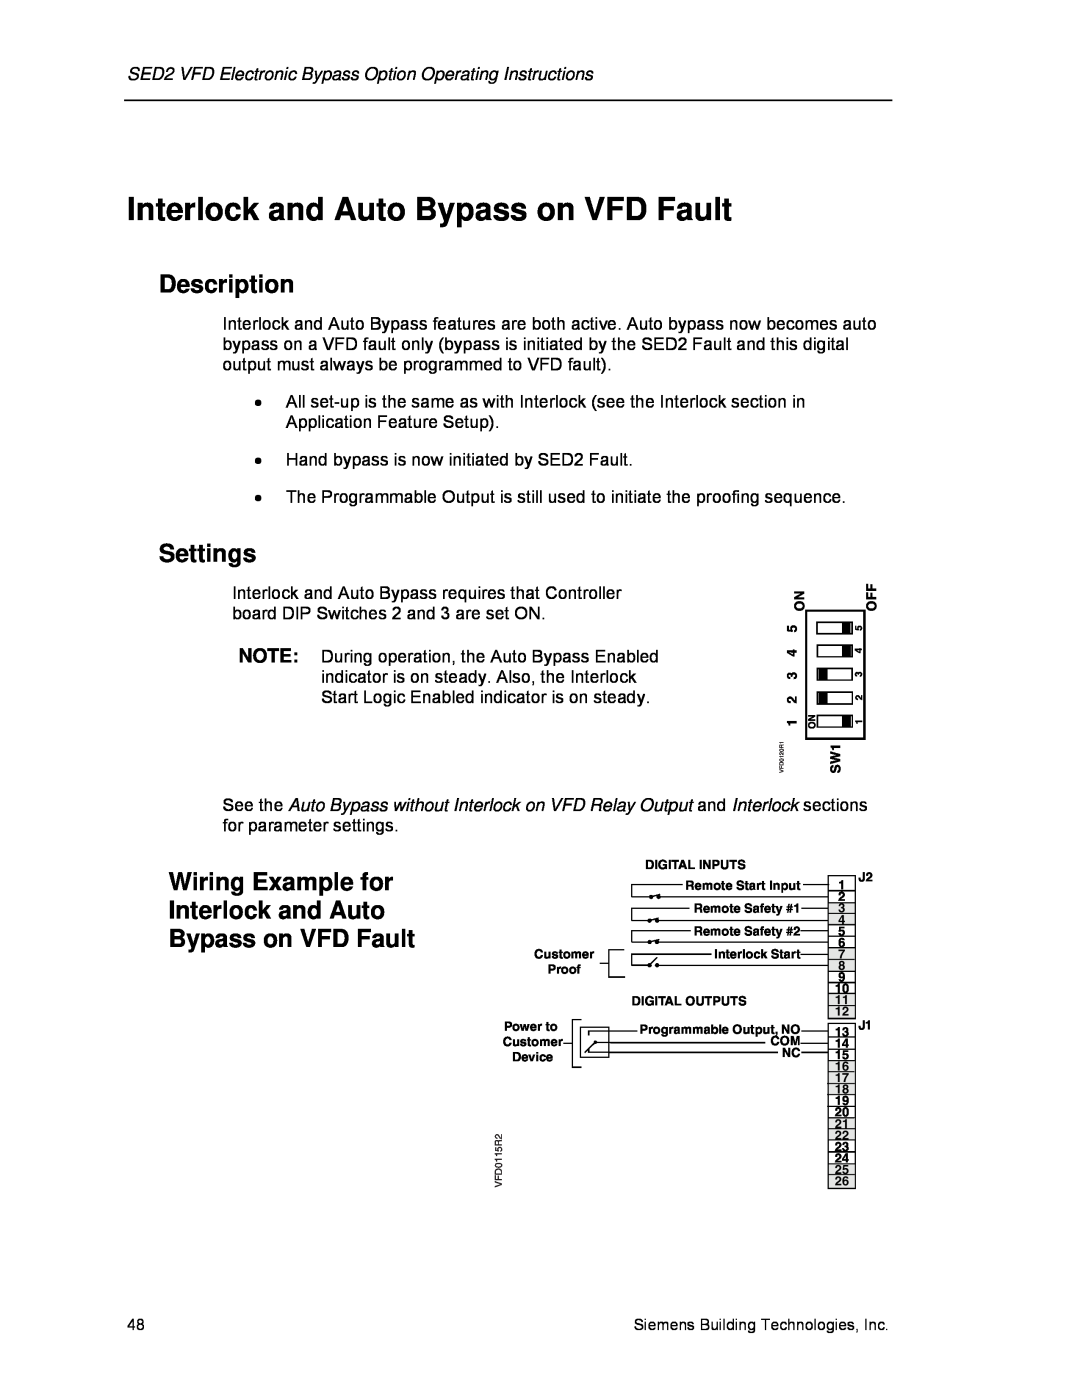 Siemens 125-3208 operating instructions Interlock and Auto Bypass on VFD Fault, Description, Settings 